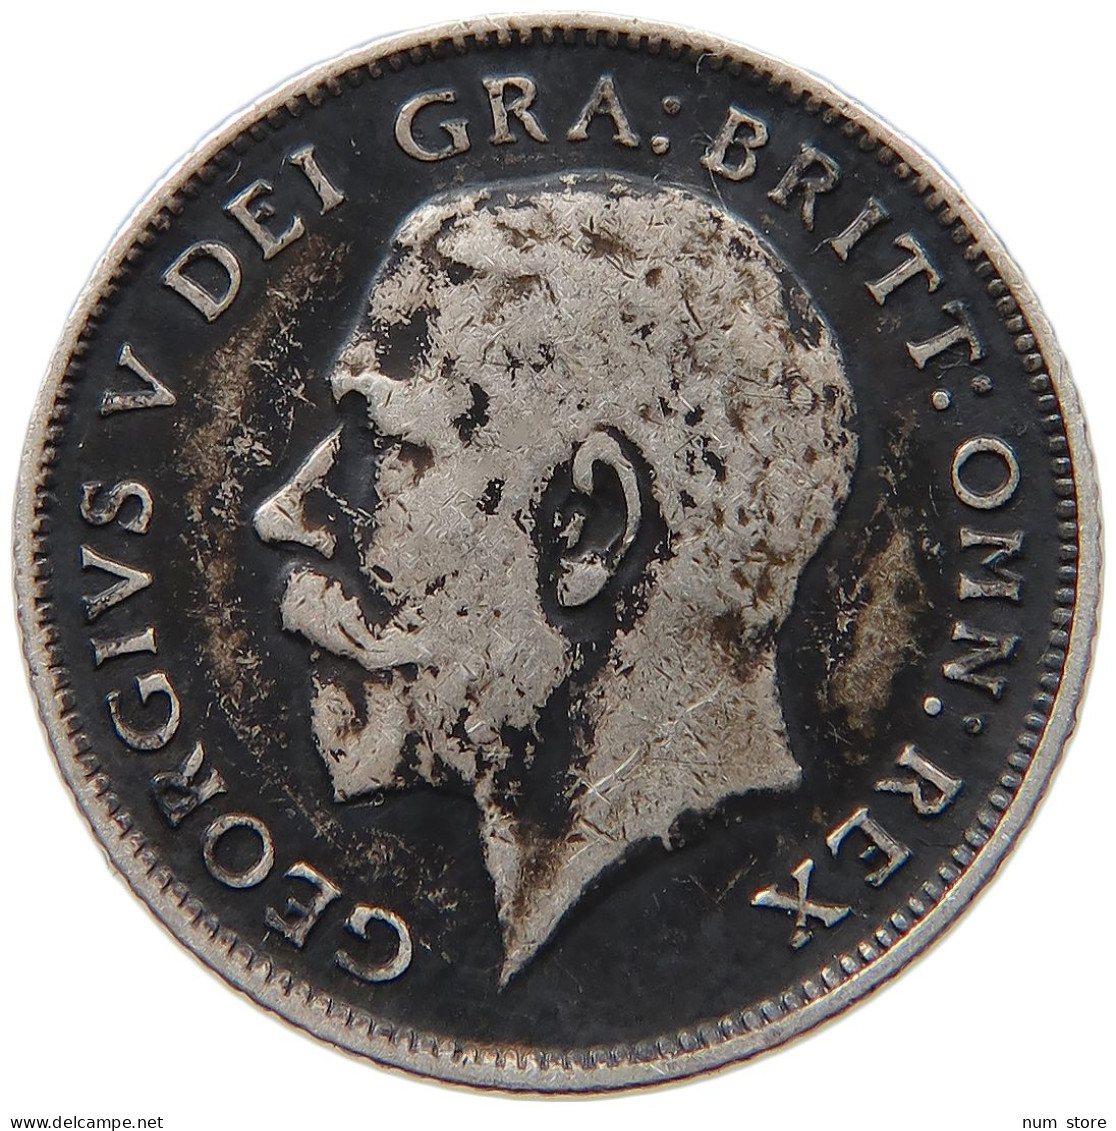 GREAT BRITAIN SIXPENCE 1914 George V. (1910-1936) #s013 0243 - H. 6 Pence